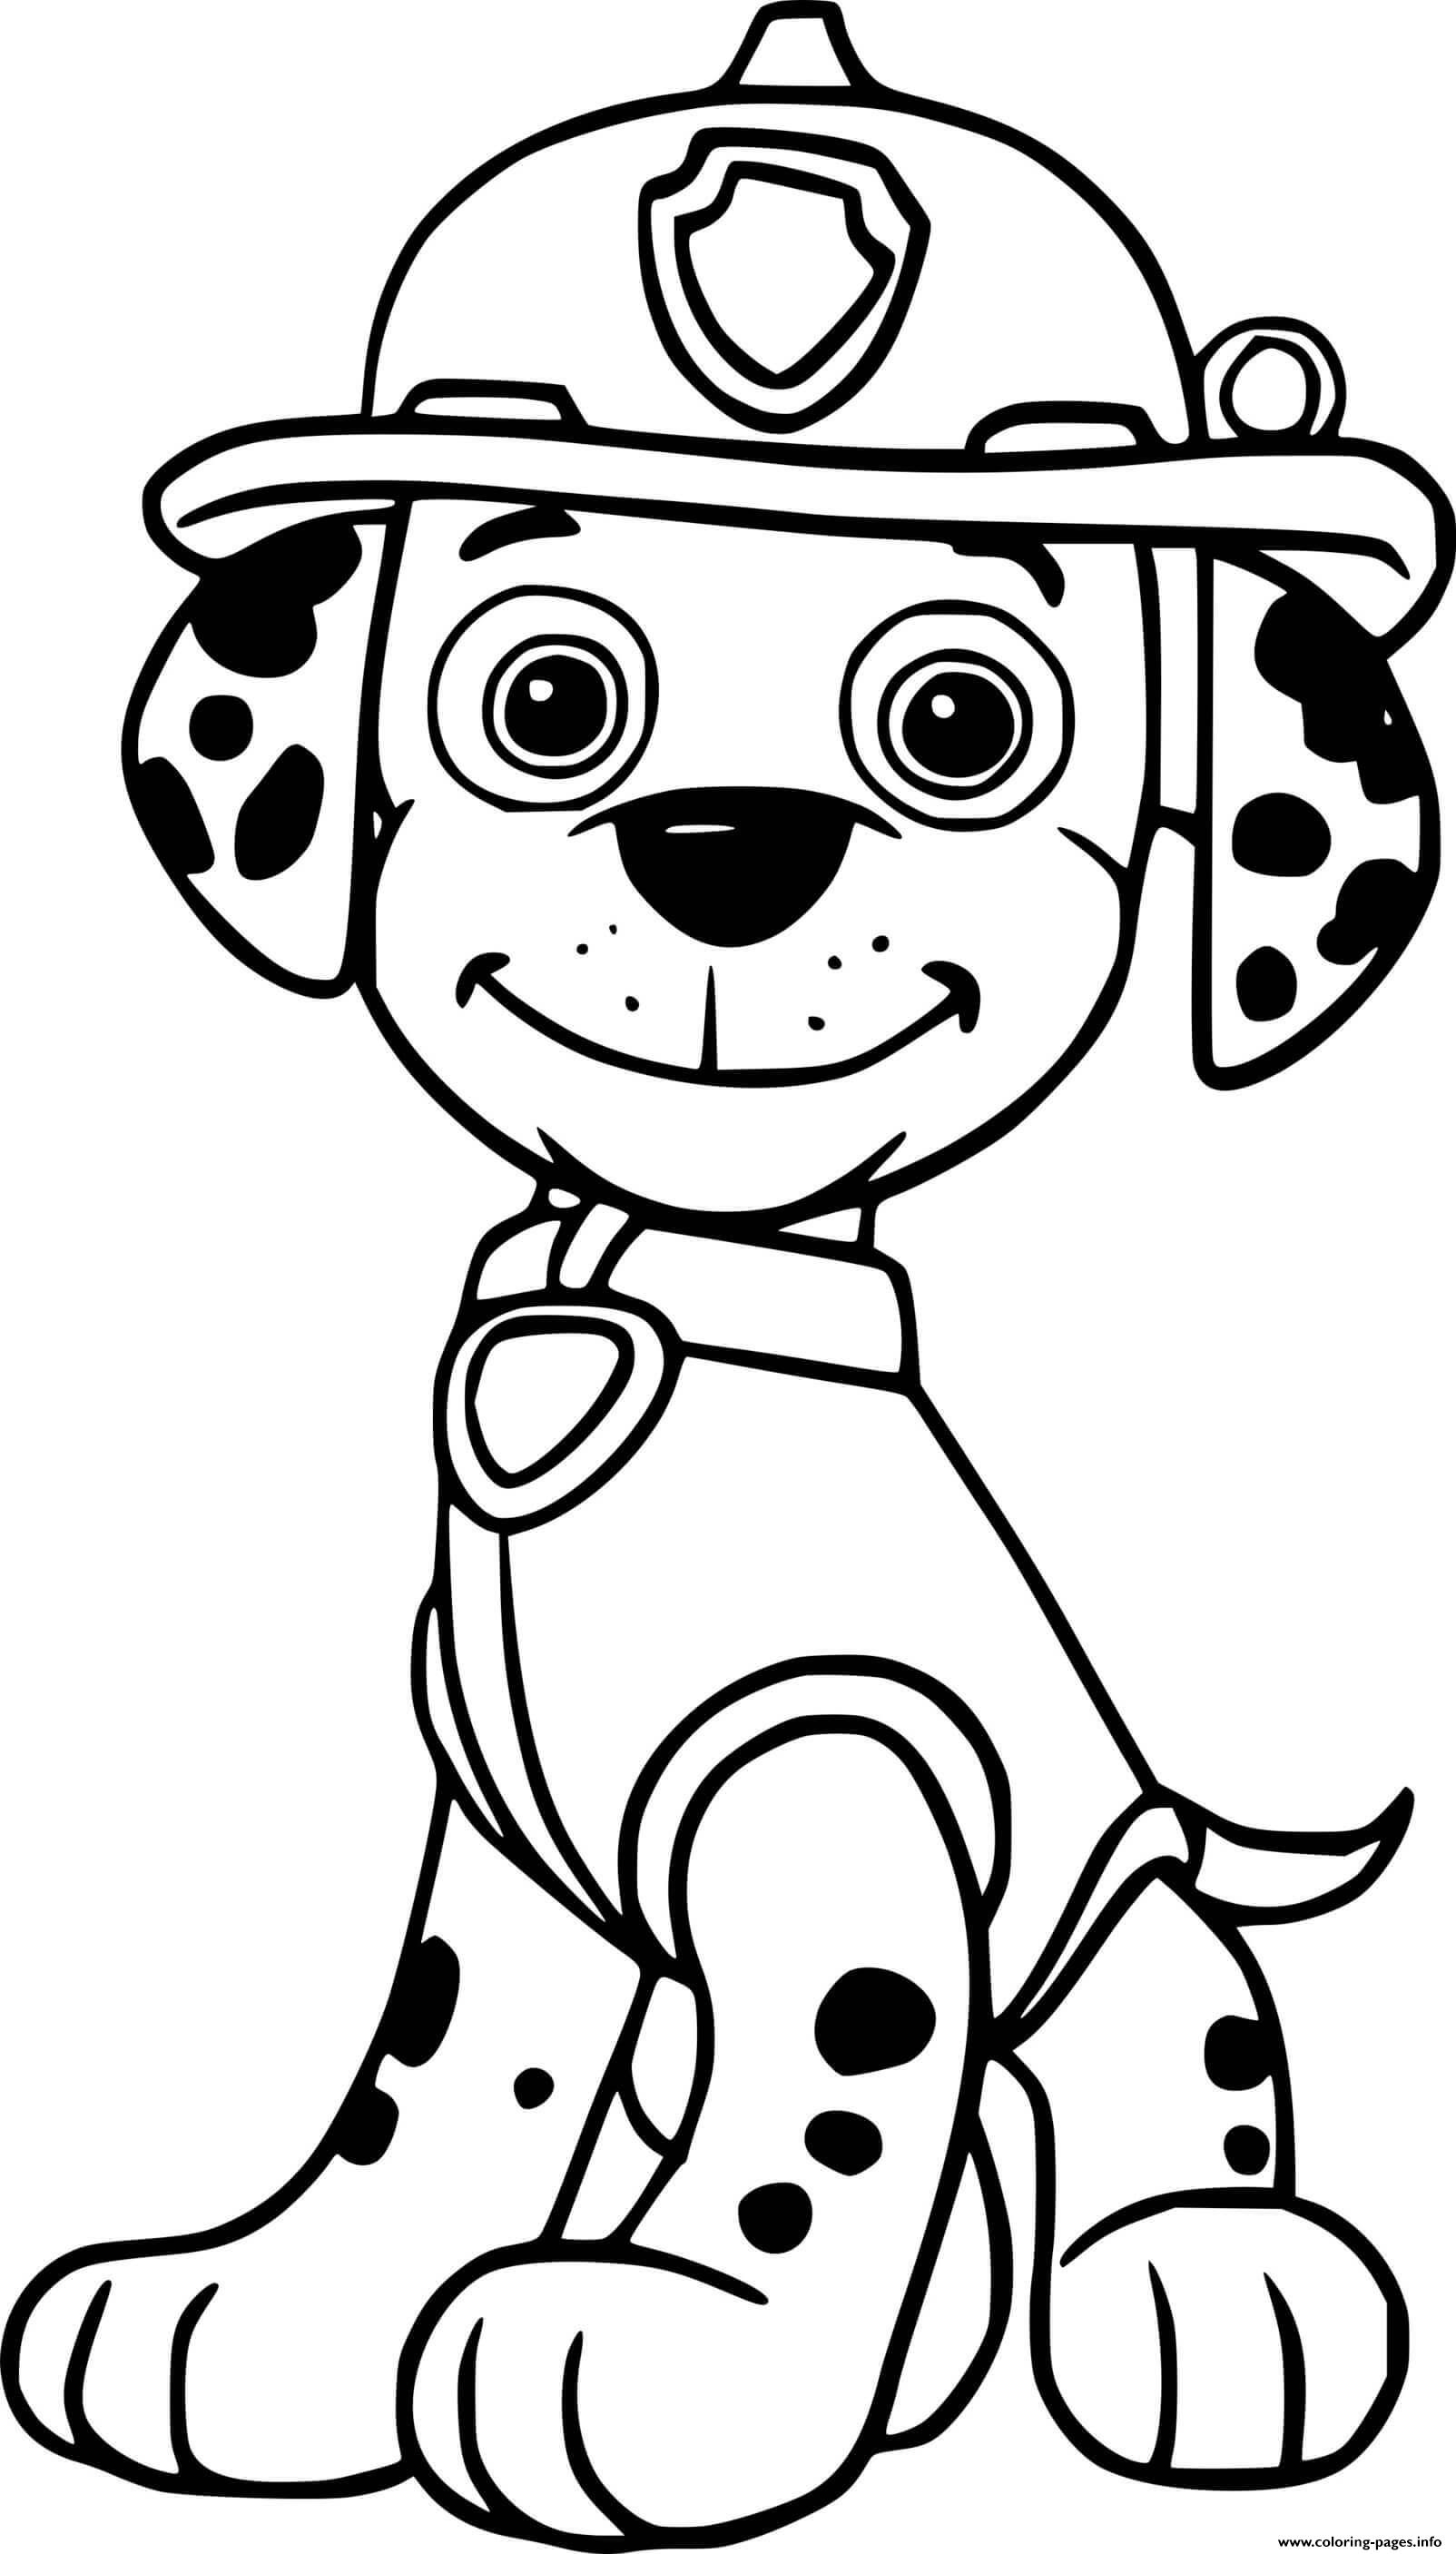 Easy Marshall From Paw Patrol coloring